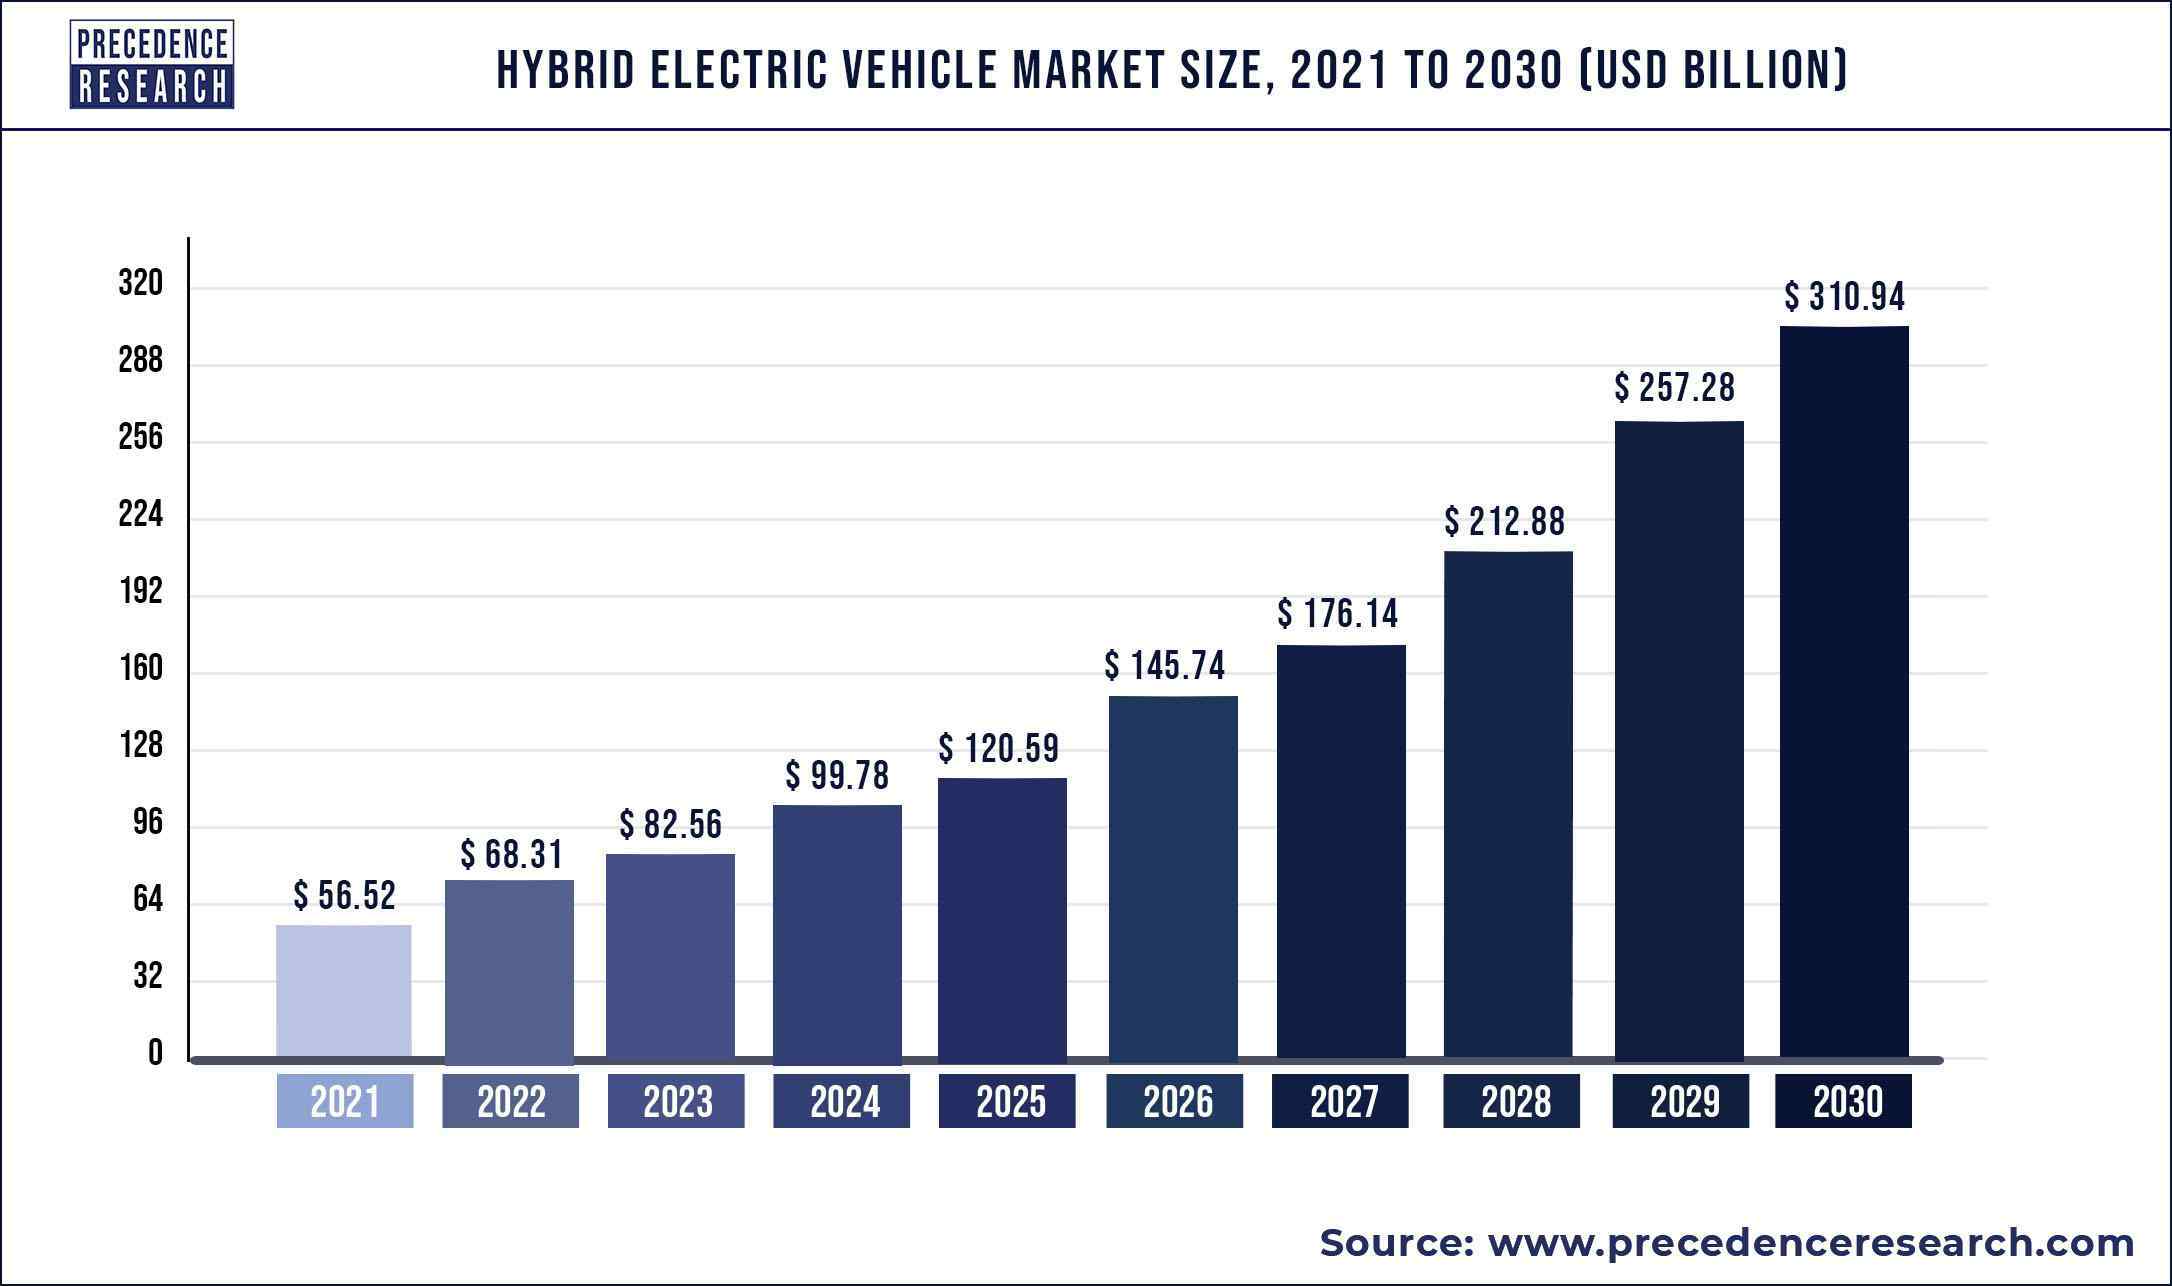 Hybrid Electric Vehicle Market Size to Exceed US$ 310.94 Billion by 2030 | Says Precedence Research